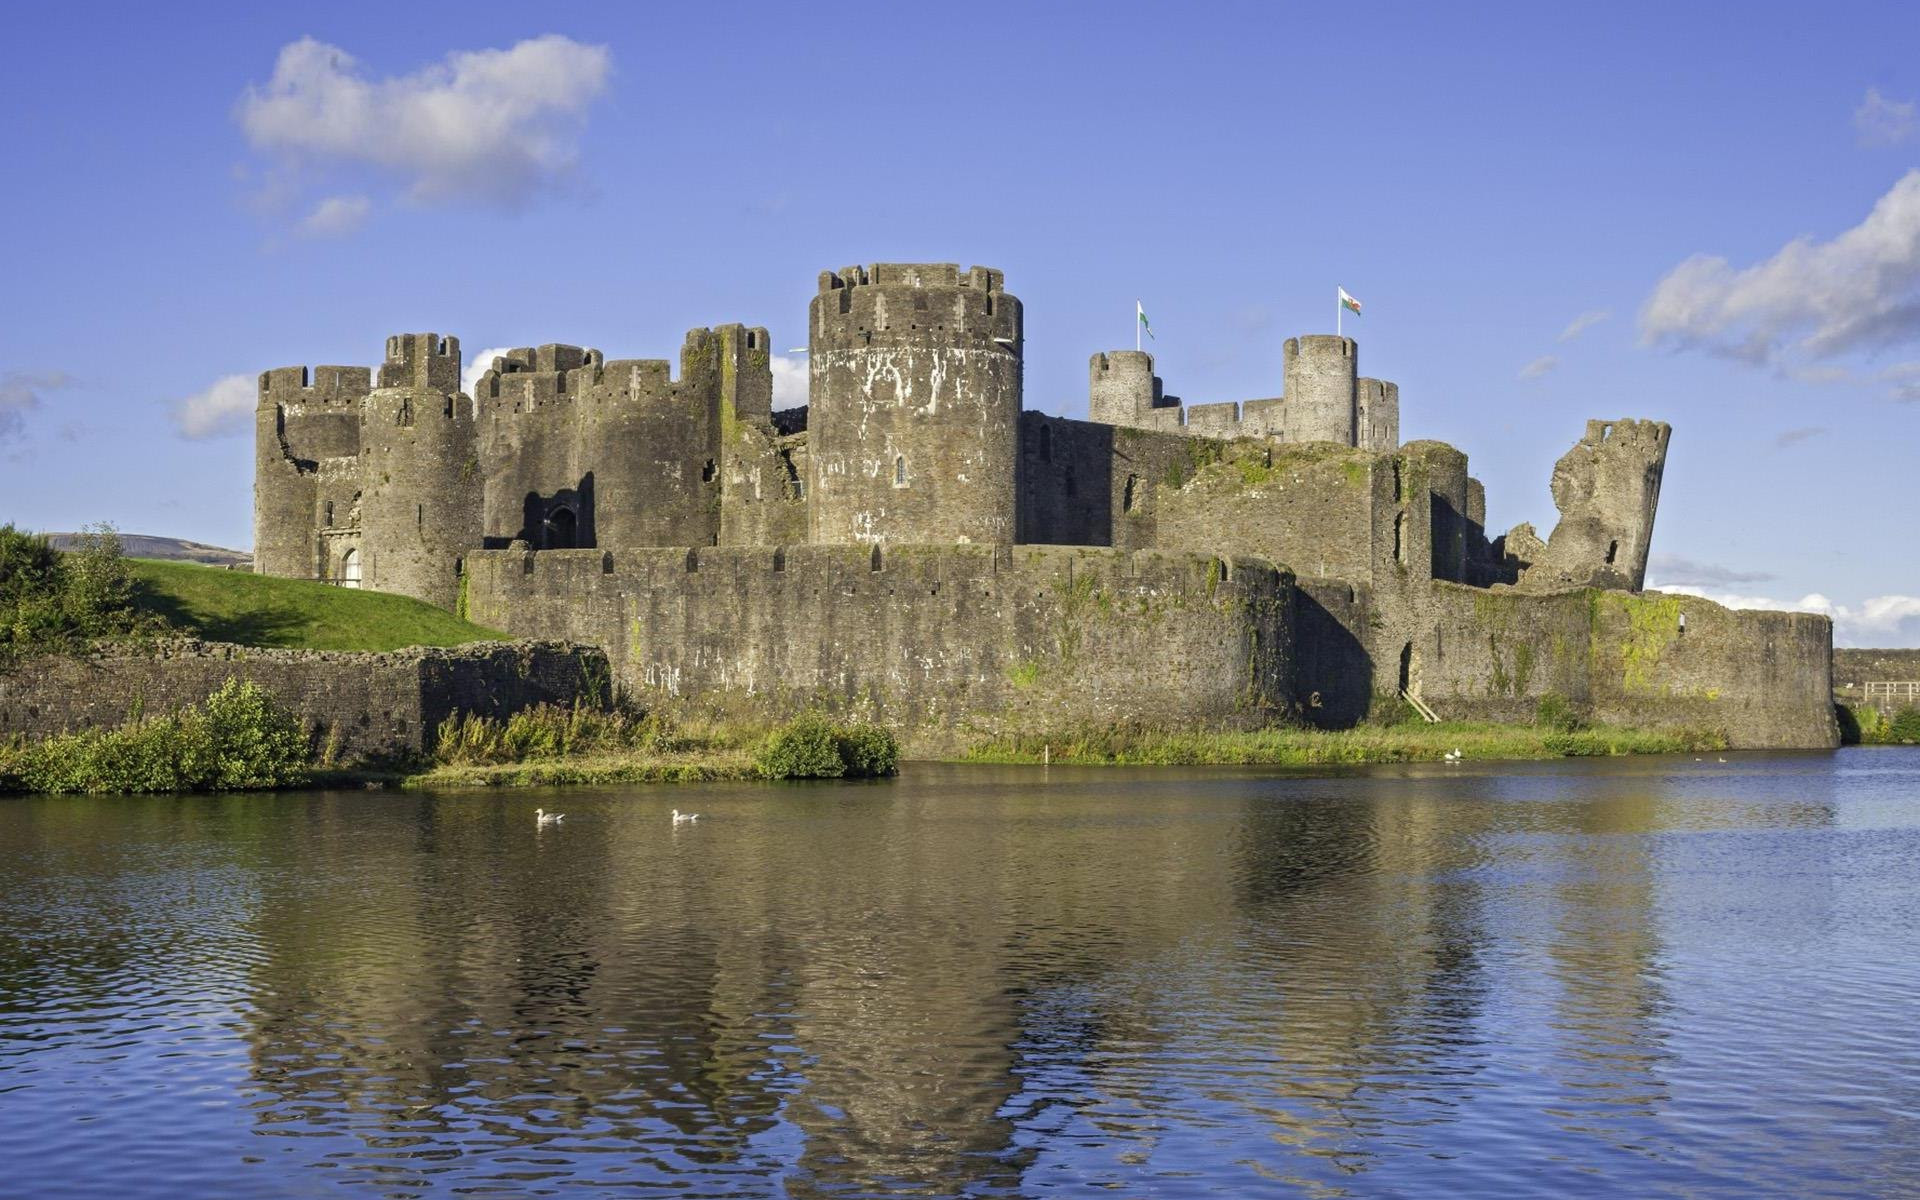 Caerphilly Castle Wallpapers